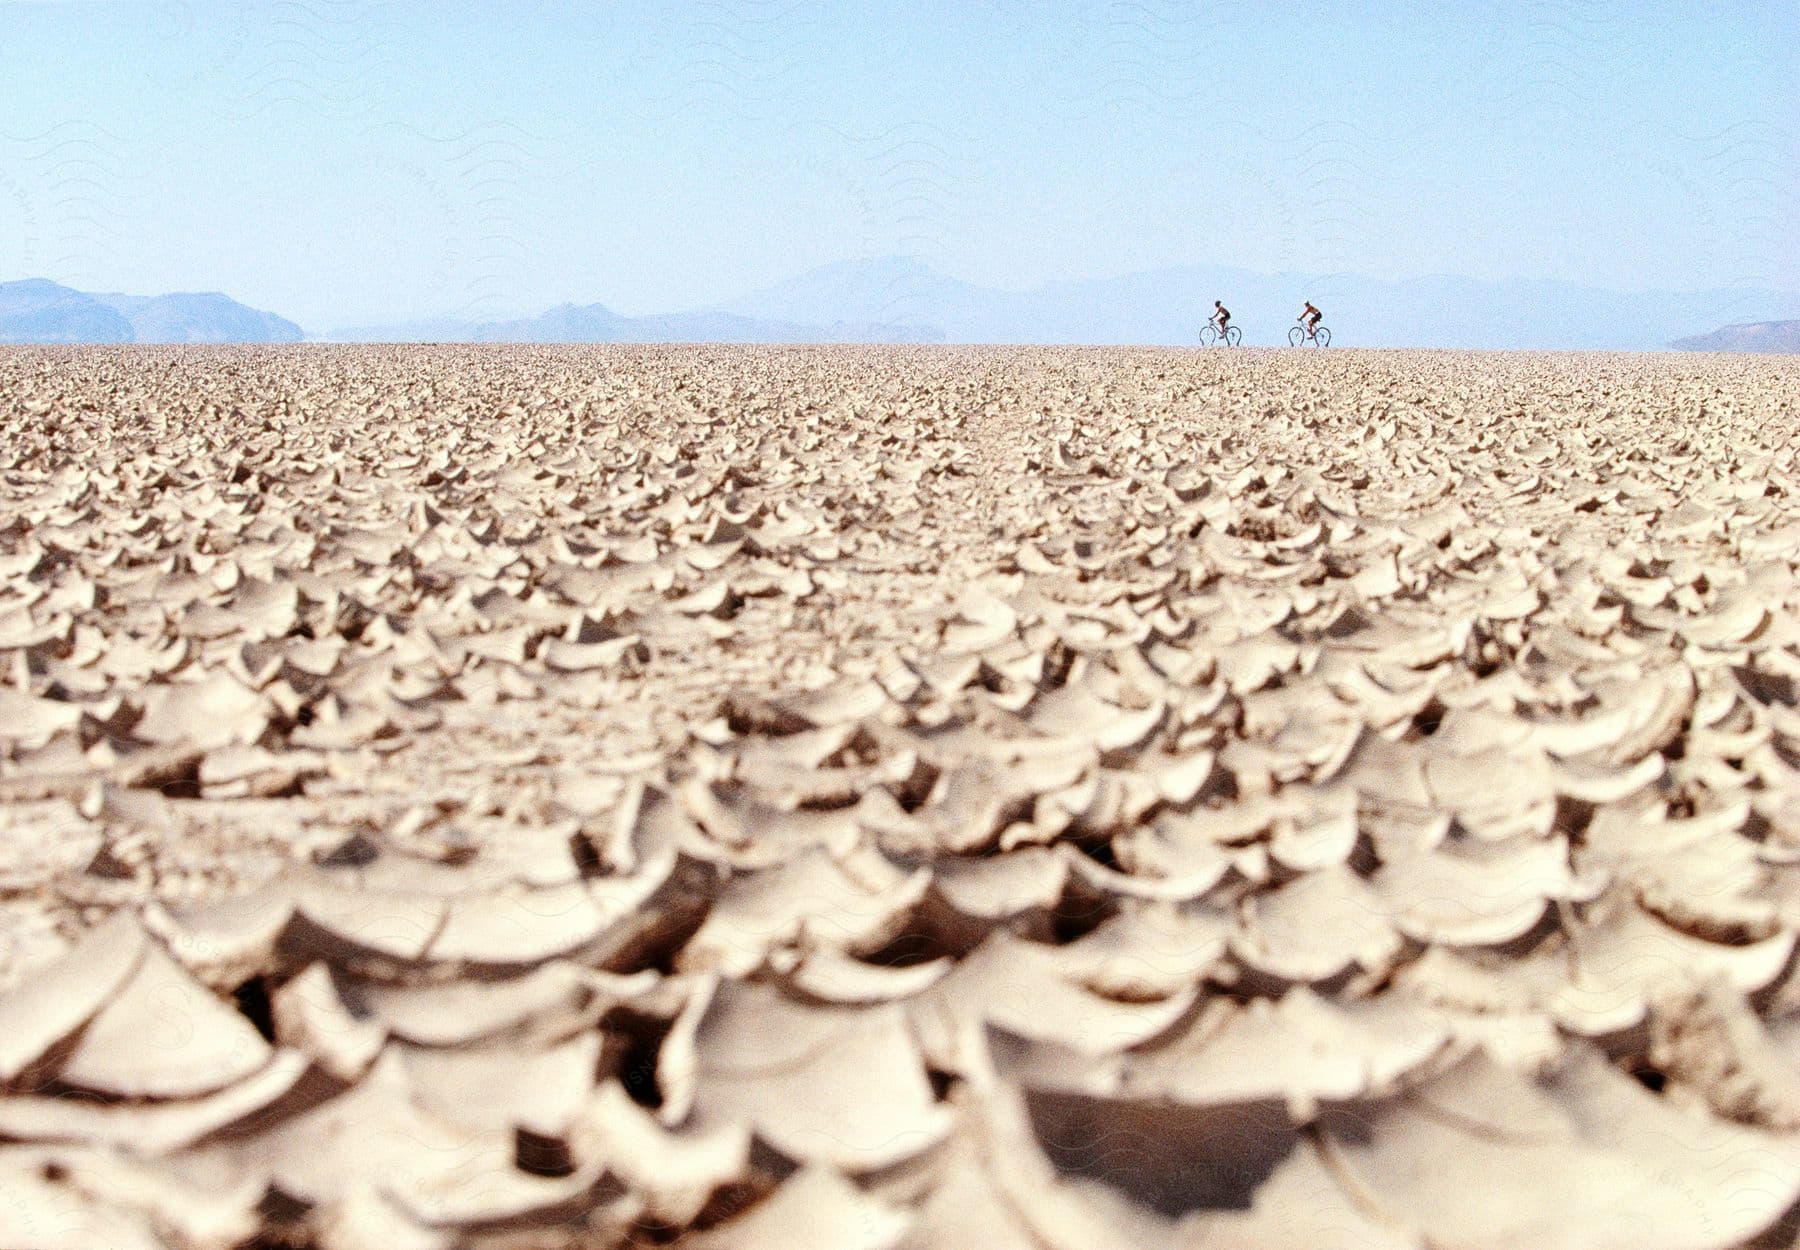 Two cyclists ride over the dry desert soil on the horizon